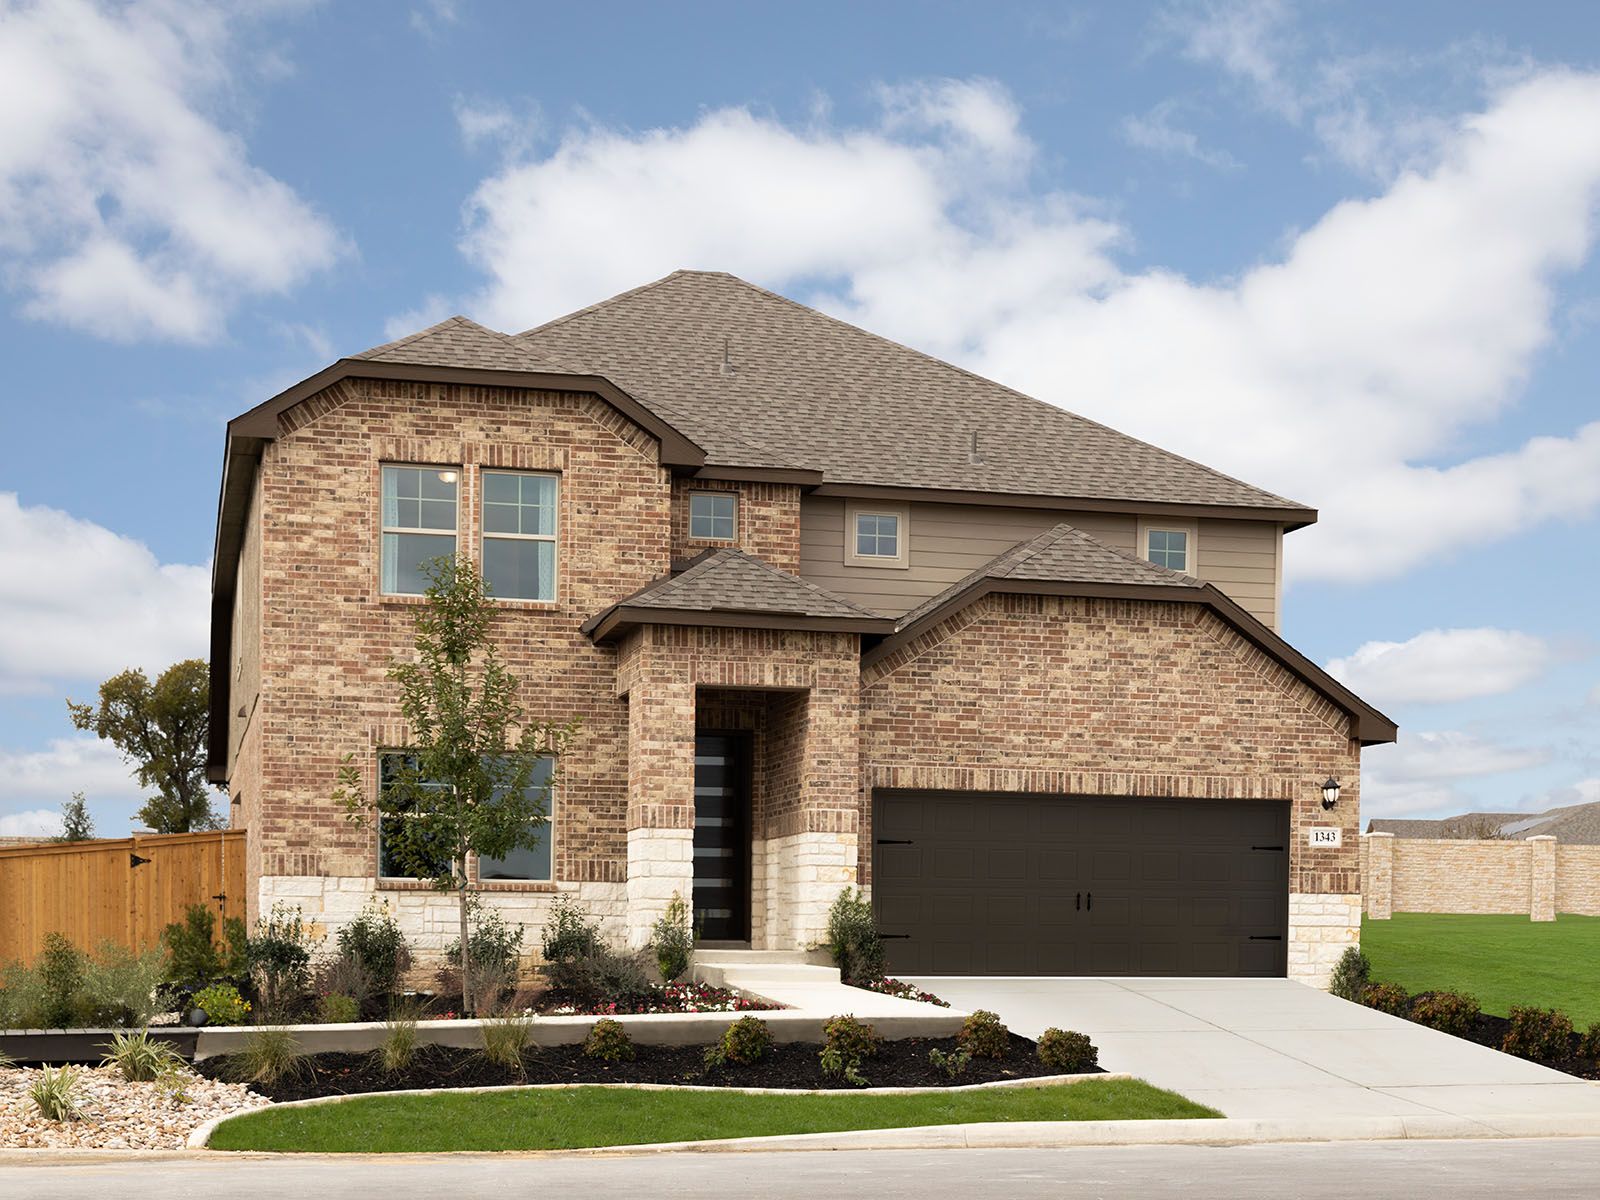 Welcome to the Legacy model at Arcadia Ridge.